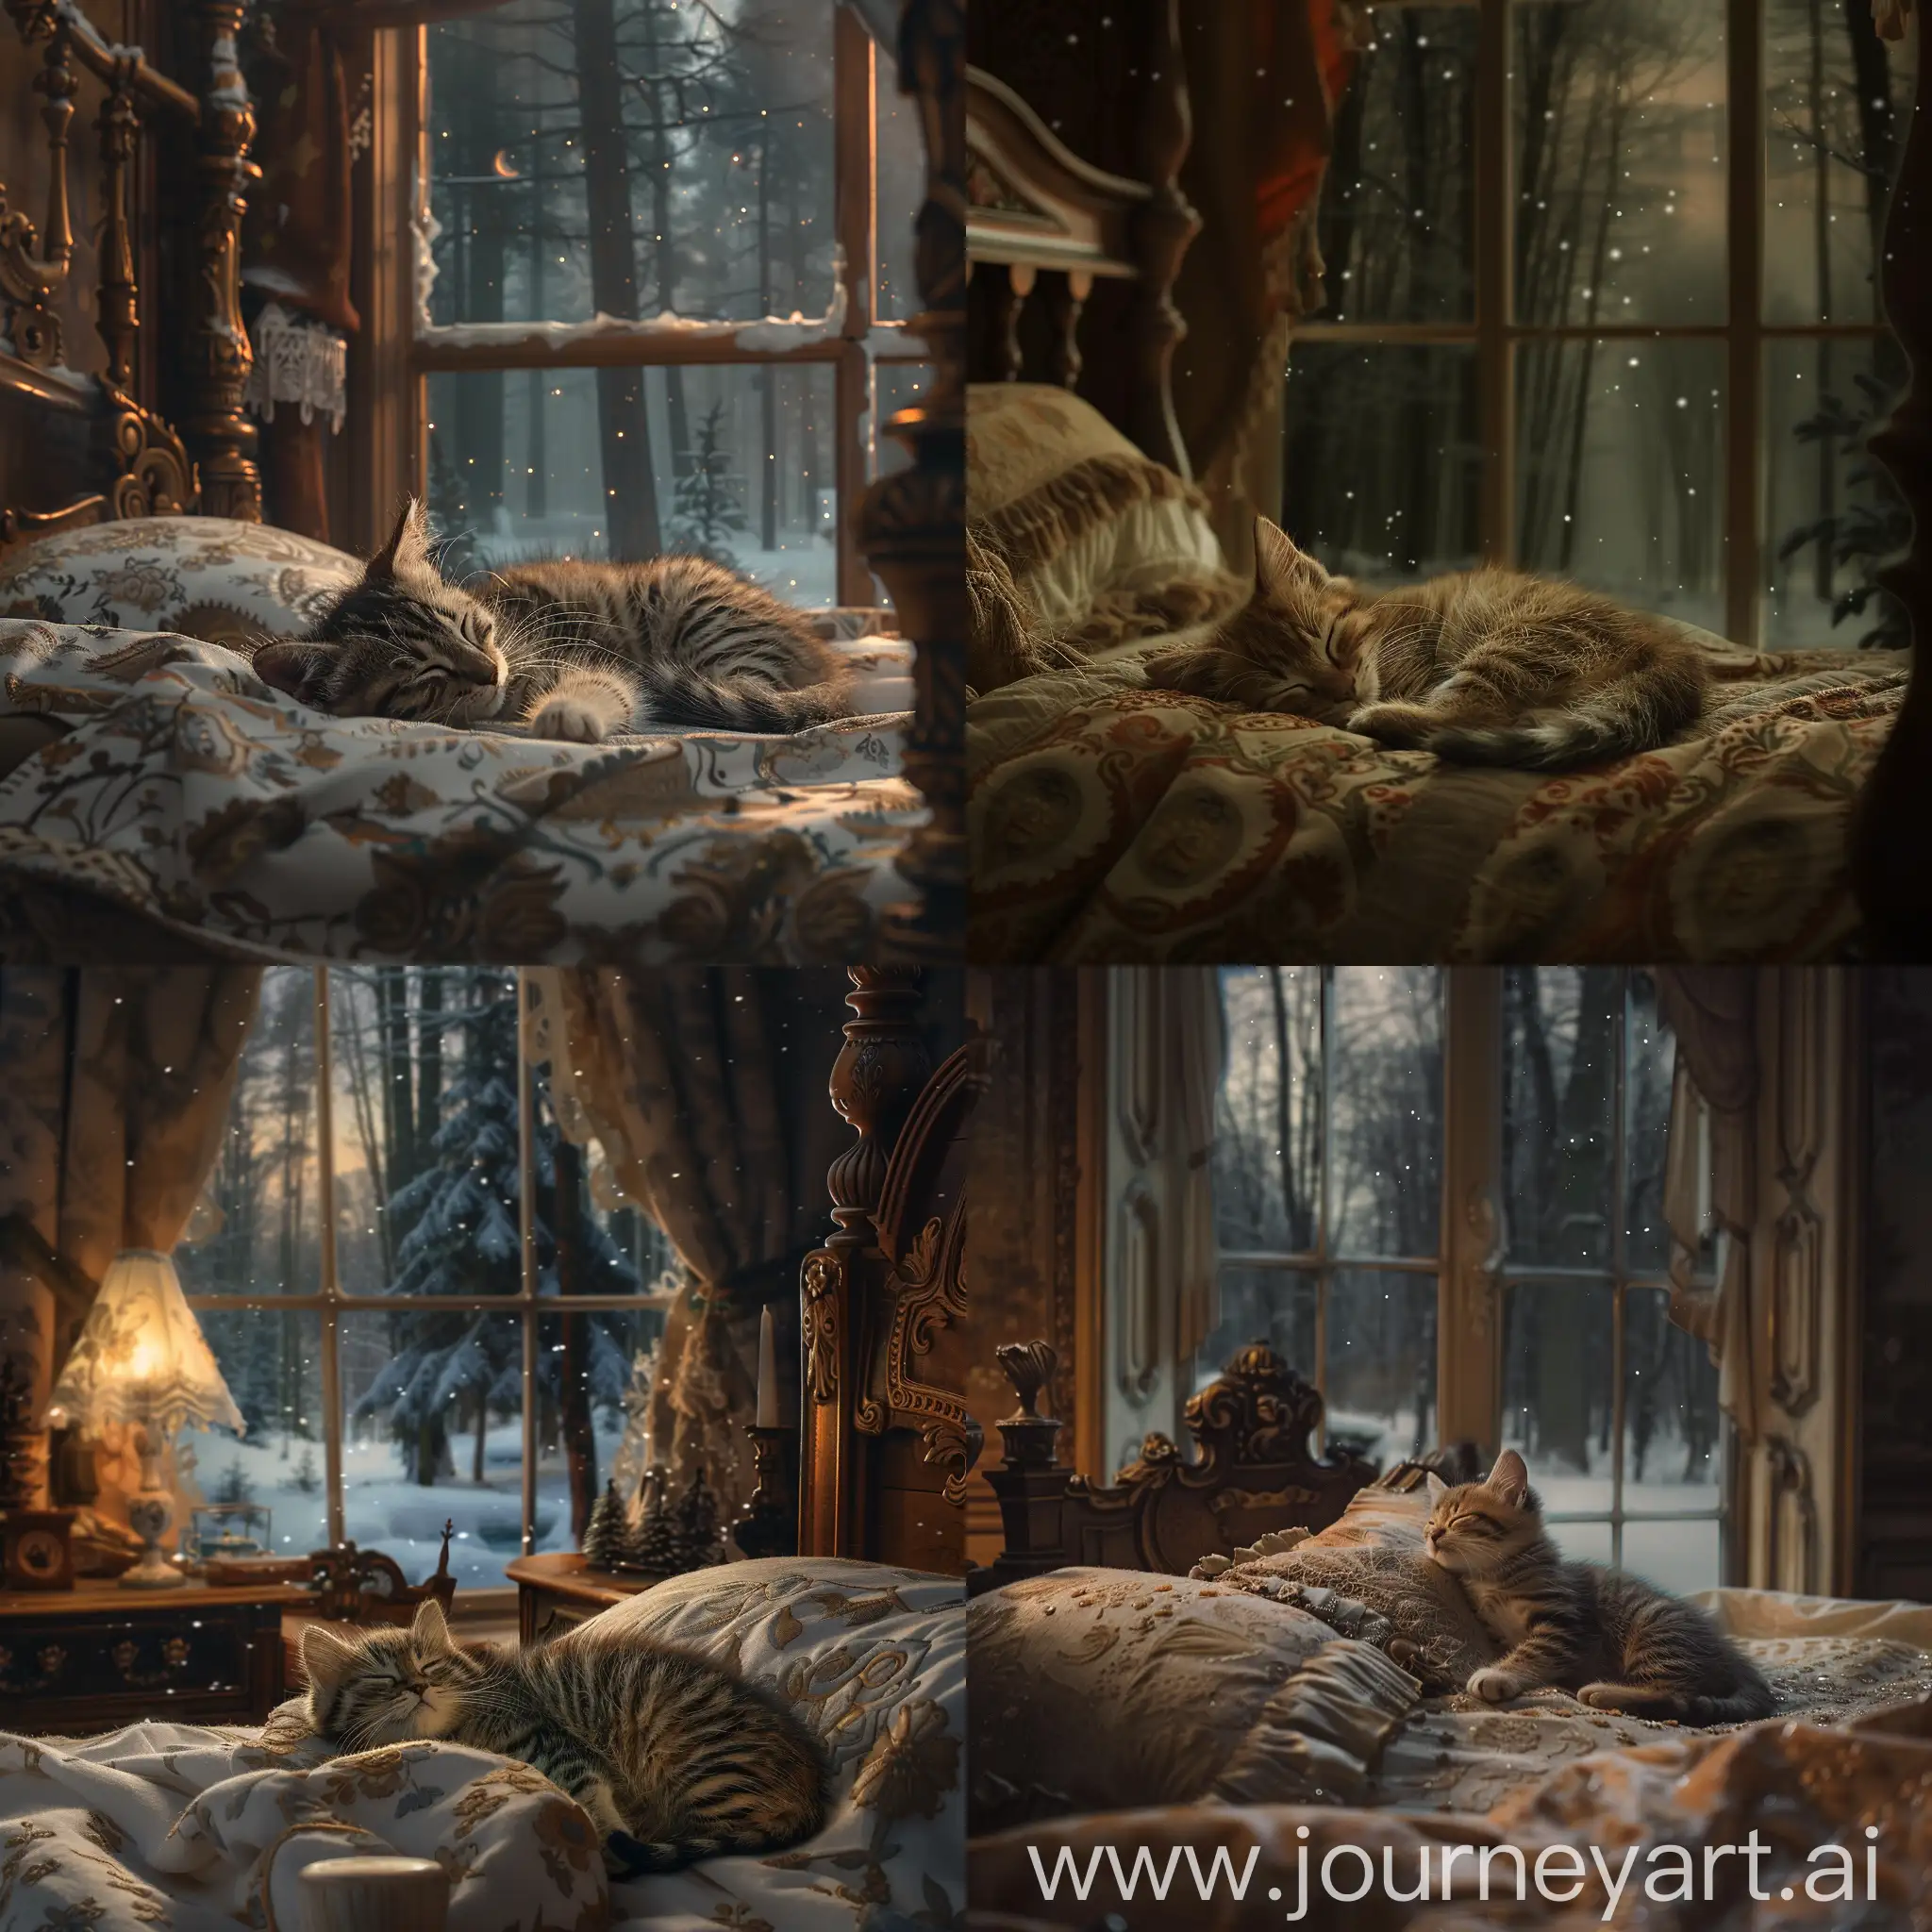 a kitten sleeping on a bed, a cozy bedroom, antique furniture, semi-darkness, a window, a winter night outside, stars. forest